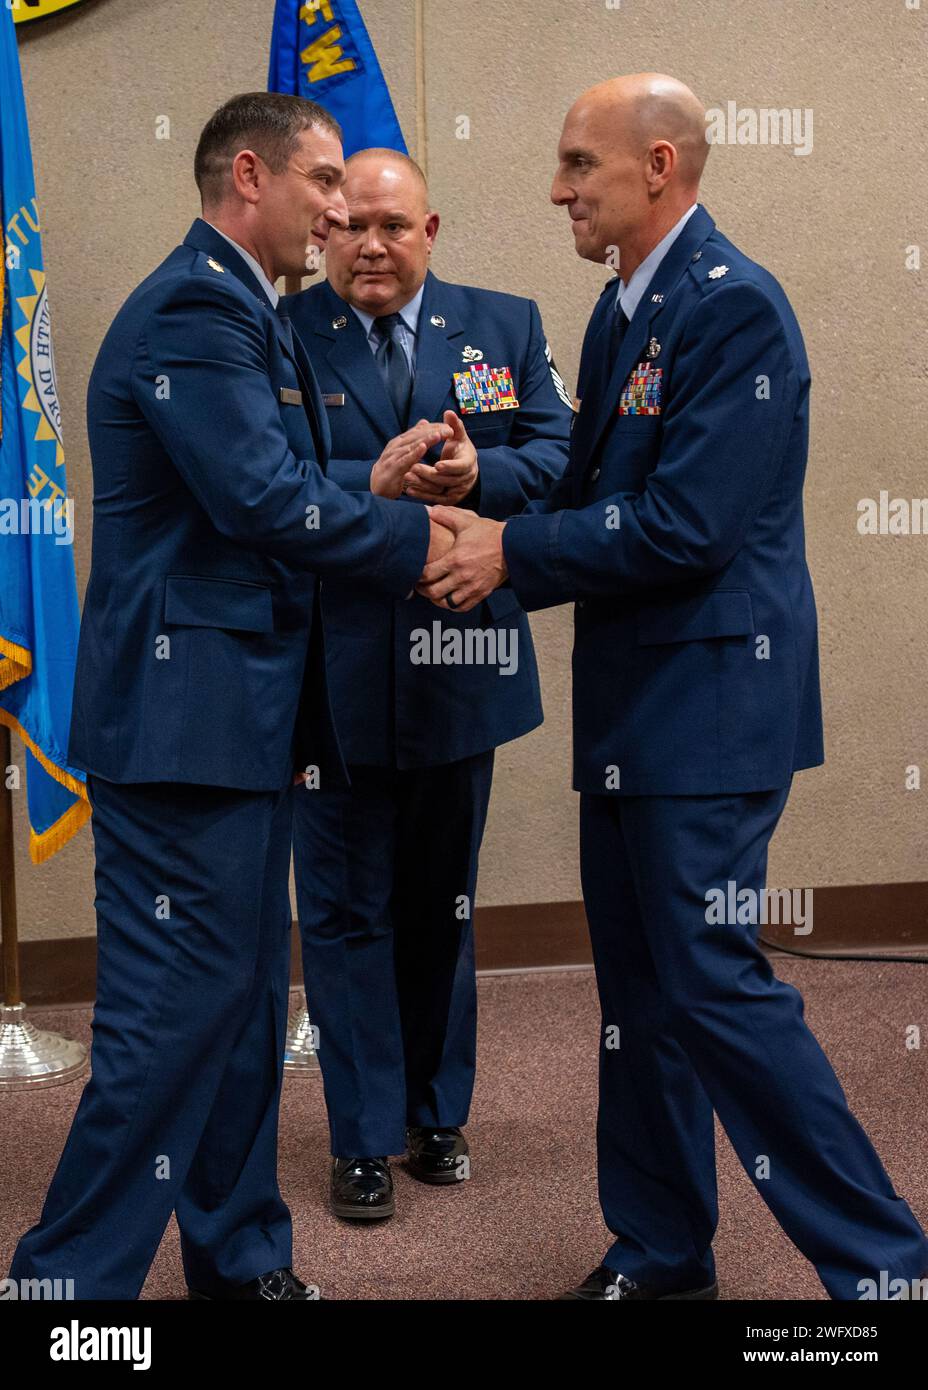 U.S. Air Force Lt. Col. Lance E. Niewenhuis (right), outgoing 114th Civil Engineer Squadron (CES) commander, congratulates Maj. Benjamin D. Shafer, incoming 114th CES commander during a change of command ceremony at Joe Foss Field, South Dakota, Jan. 7, 2024. The primary aim of the ceremony is to allow the team members to witness the formality of command change from one officer to another. Stock Photo